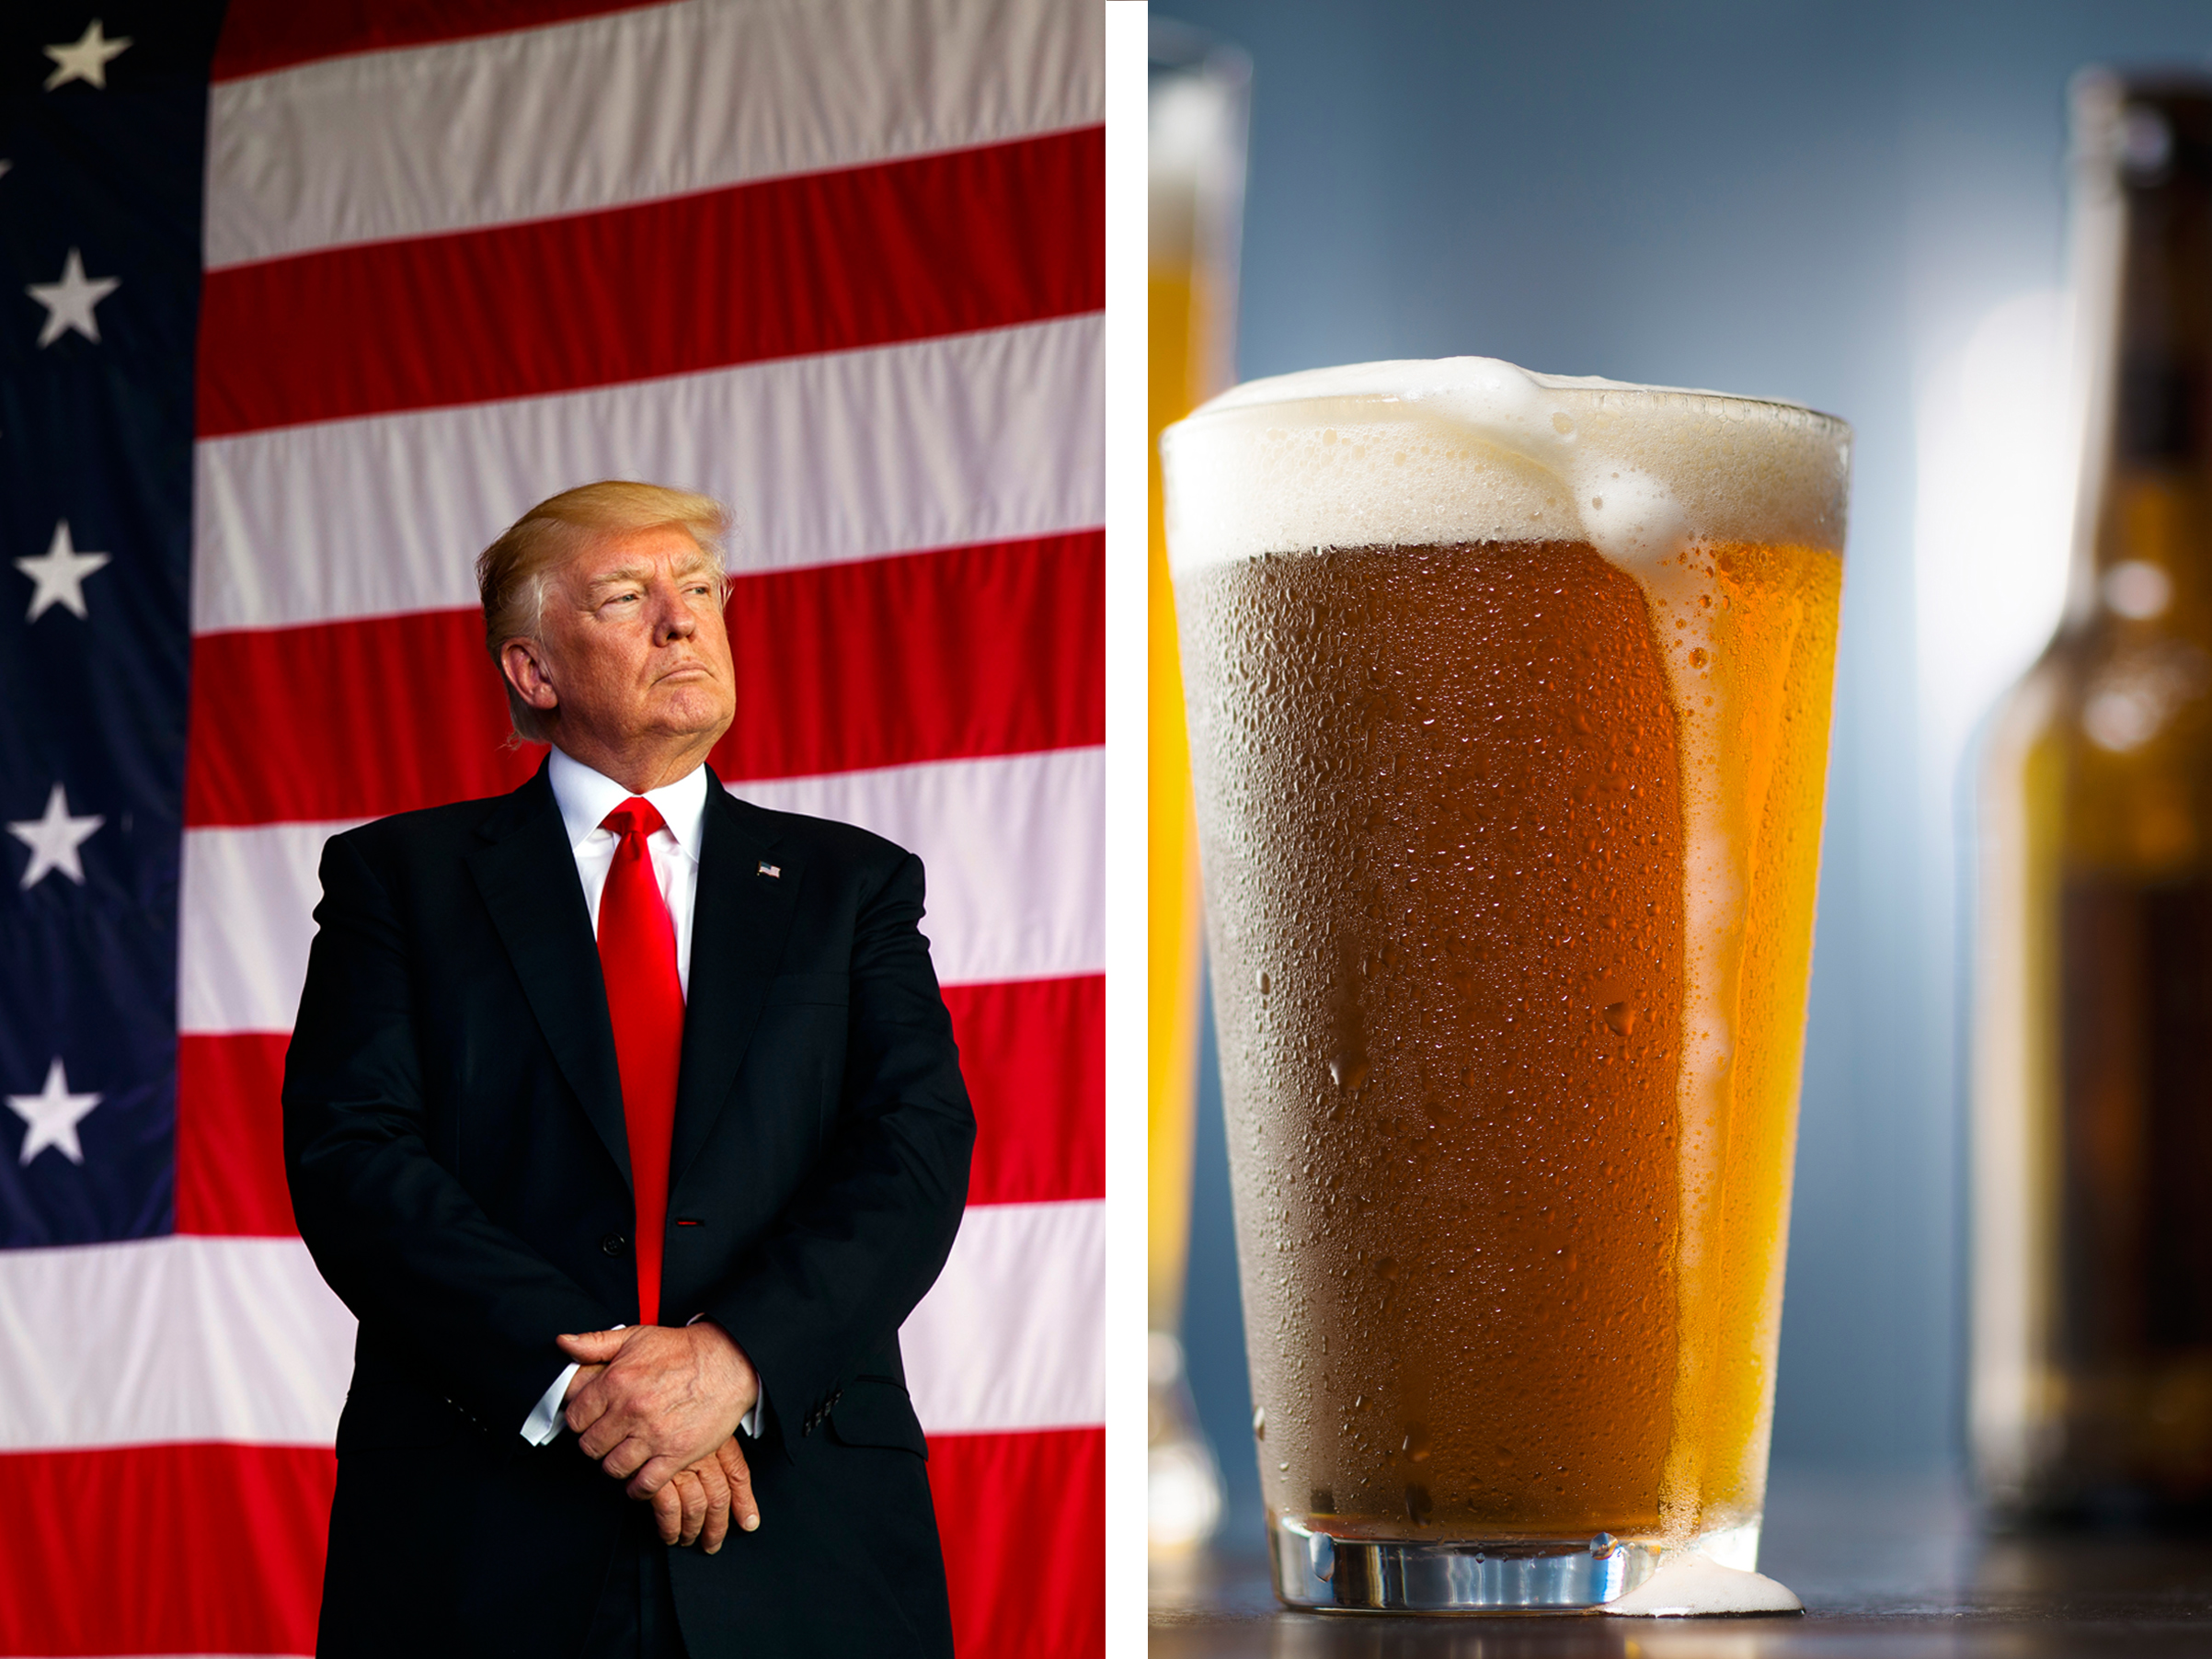 Donald Trump’s Proposal to ‘Buy American, Hire American’ Could Cause Beer Prices to Rise